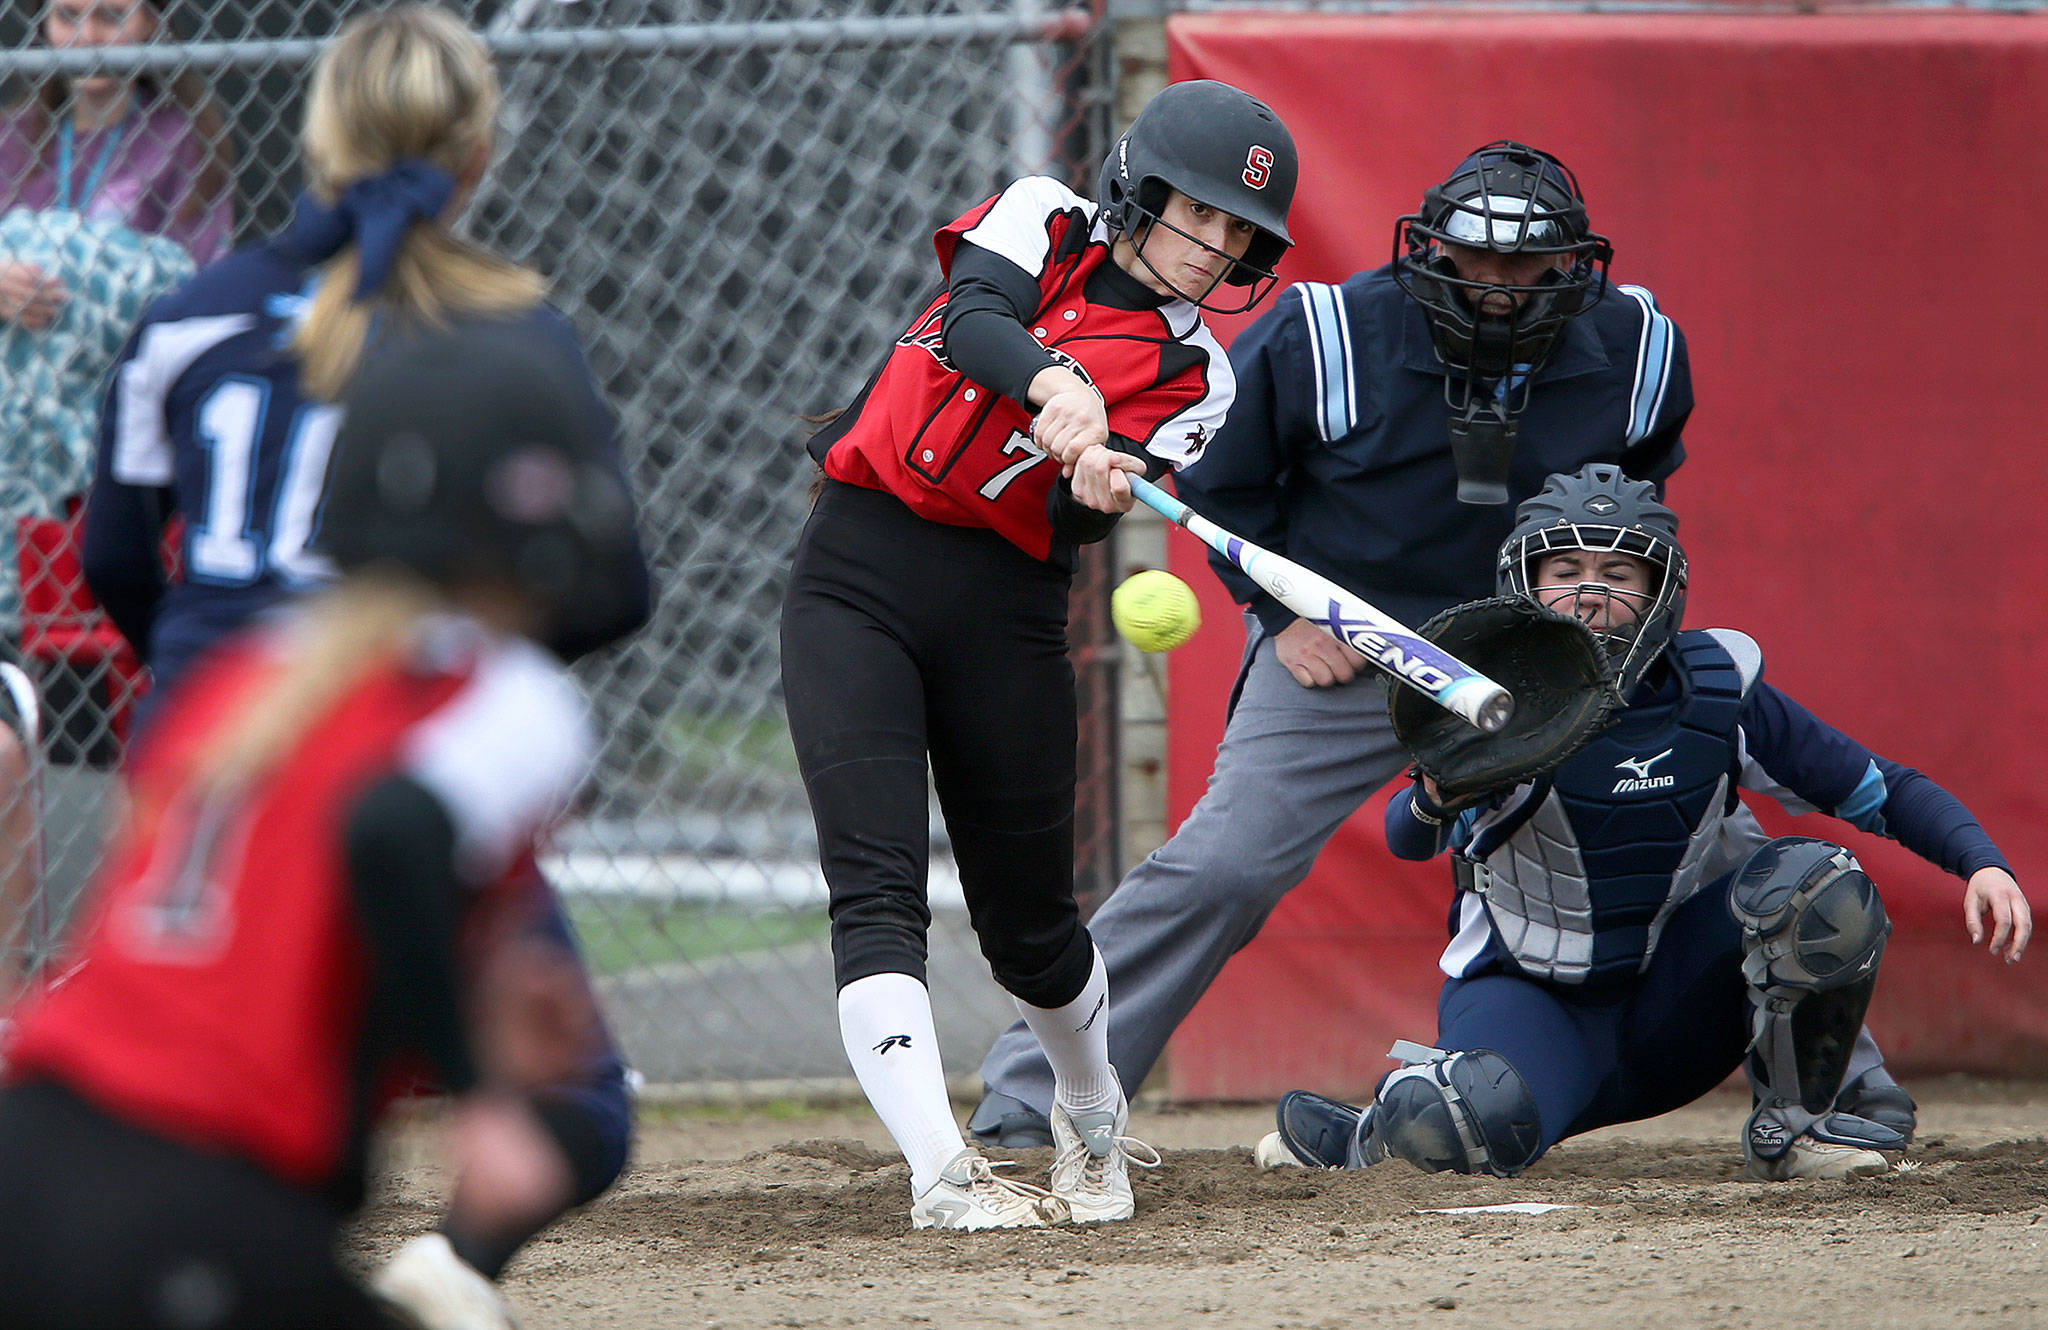 Snohomish’s Bailey Greenlee hits a three-run triple during a game against Meadowdale on April 25, 2017, in Snohomish. (Andy Bronson / The Herald) ​